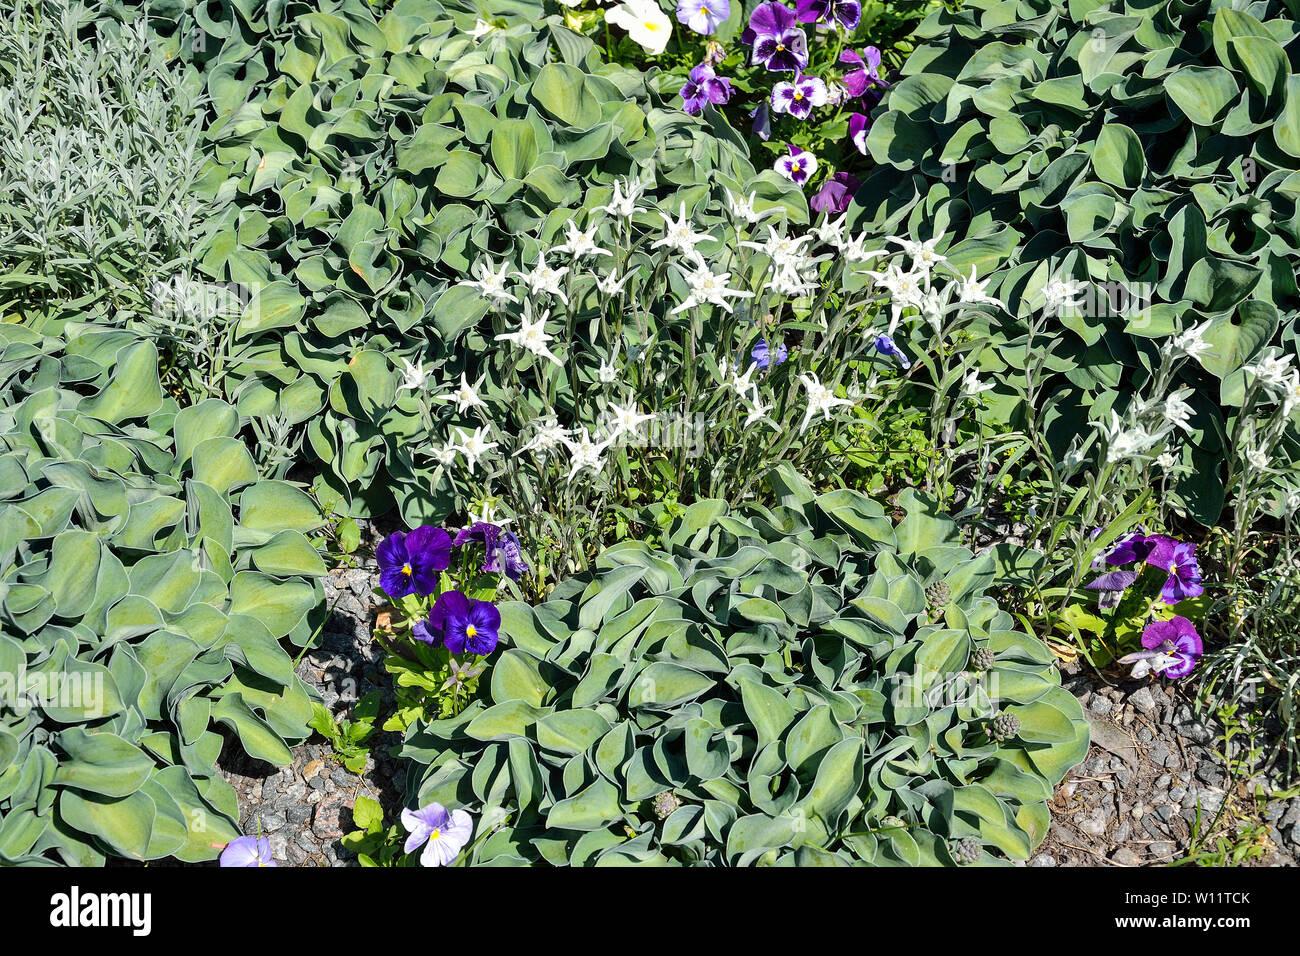 Decorative plants Hosta  with green leaves for landscaping design in park or garden on the flowerbed among blue and white flowers. Hostas are unpreten Stock Photo